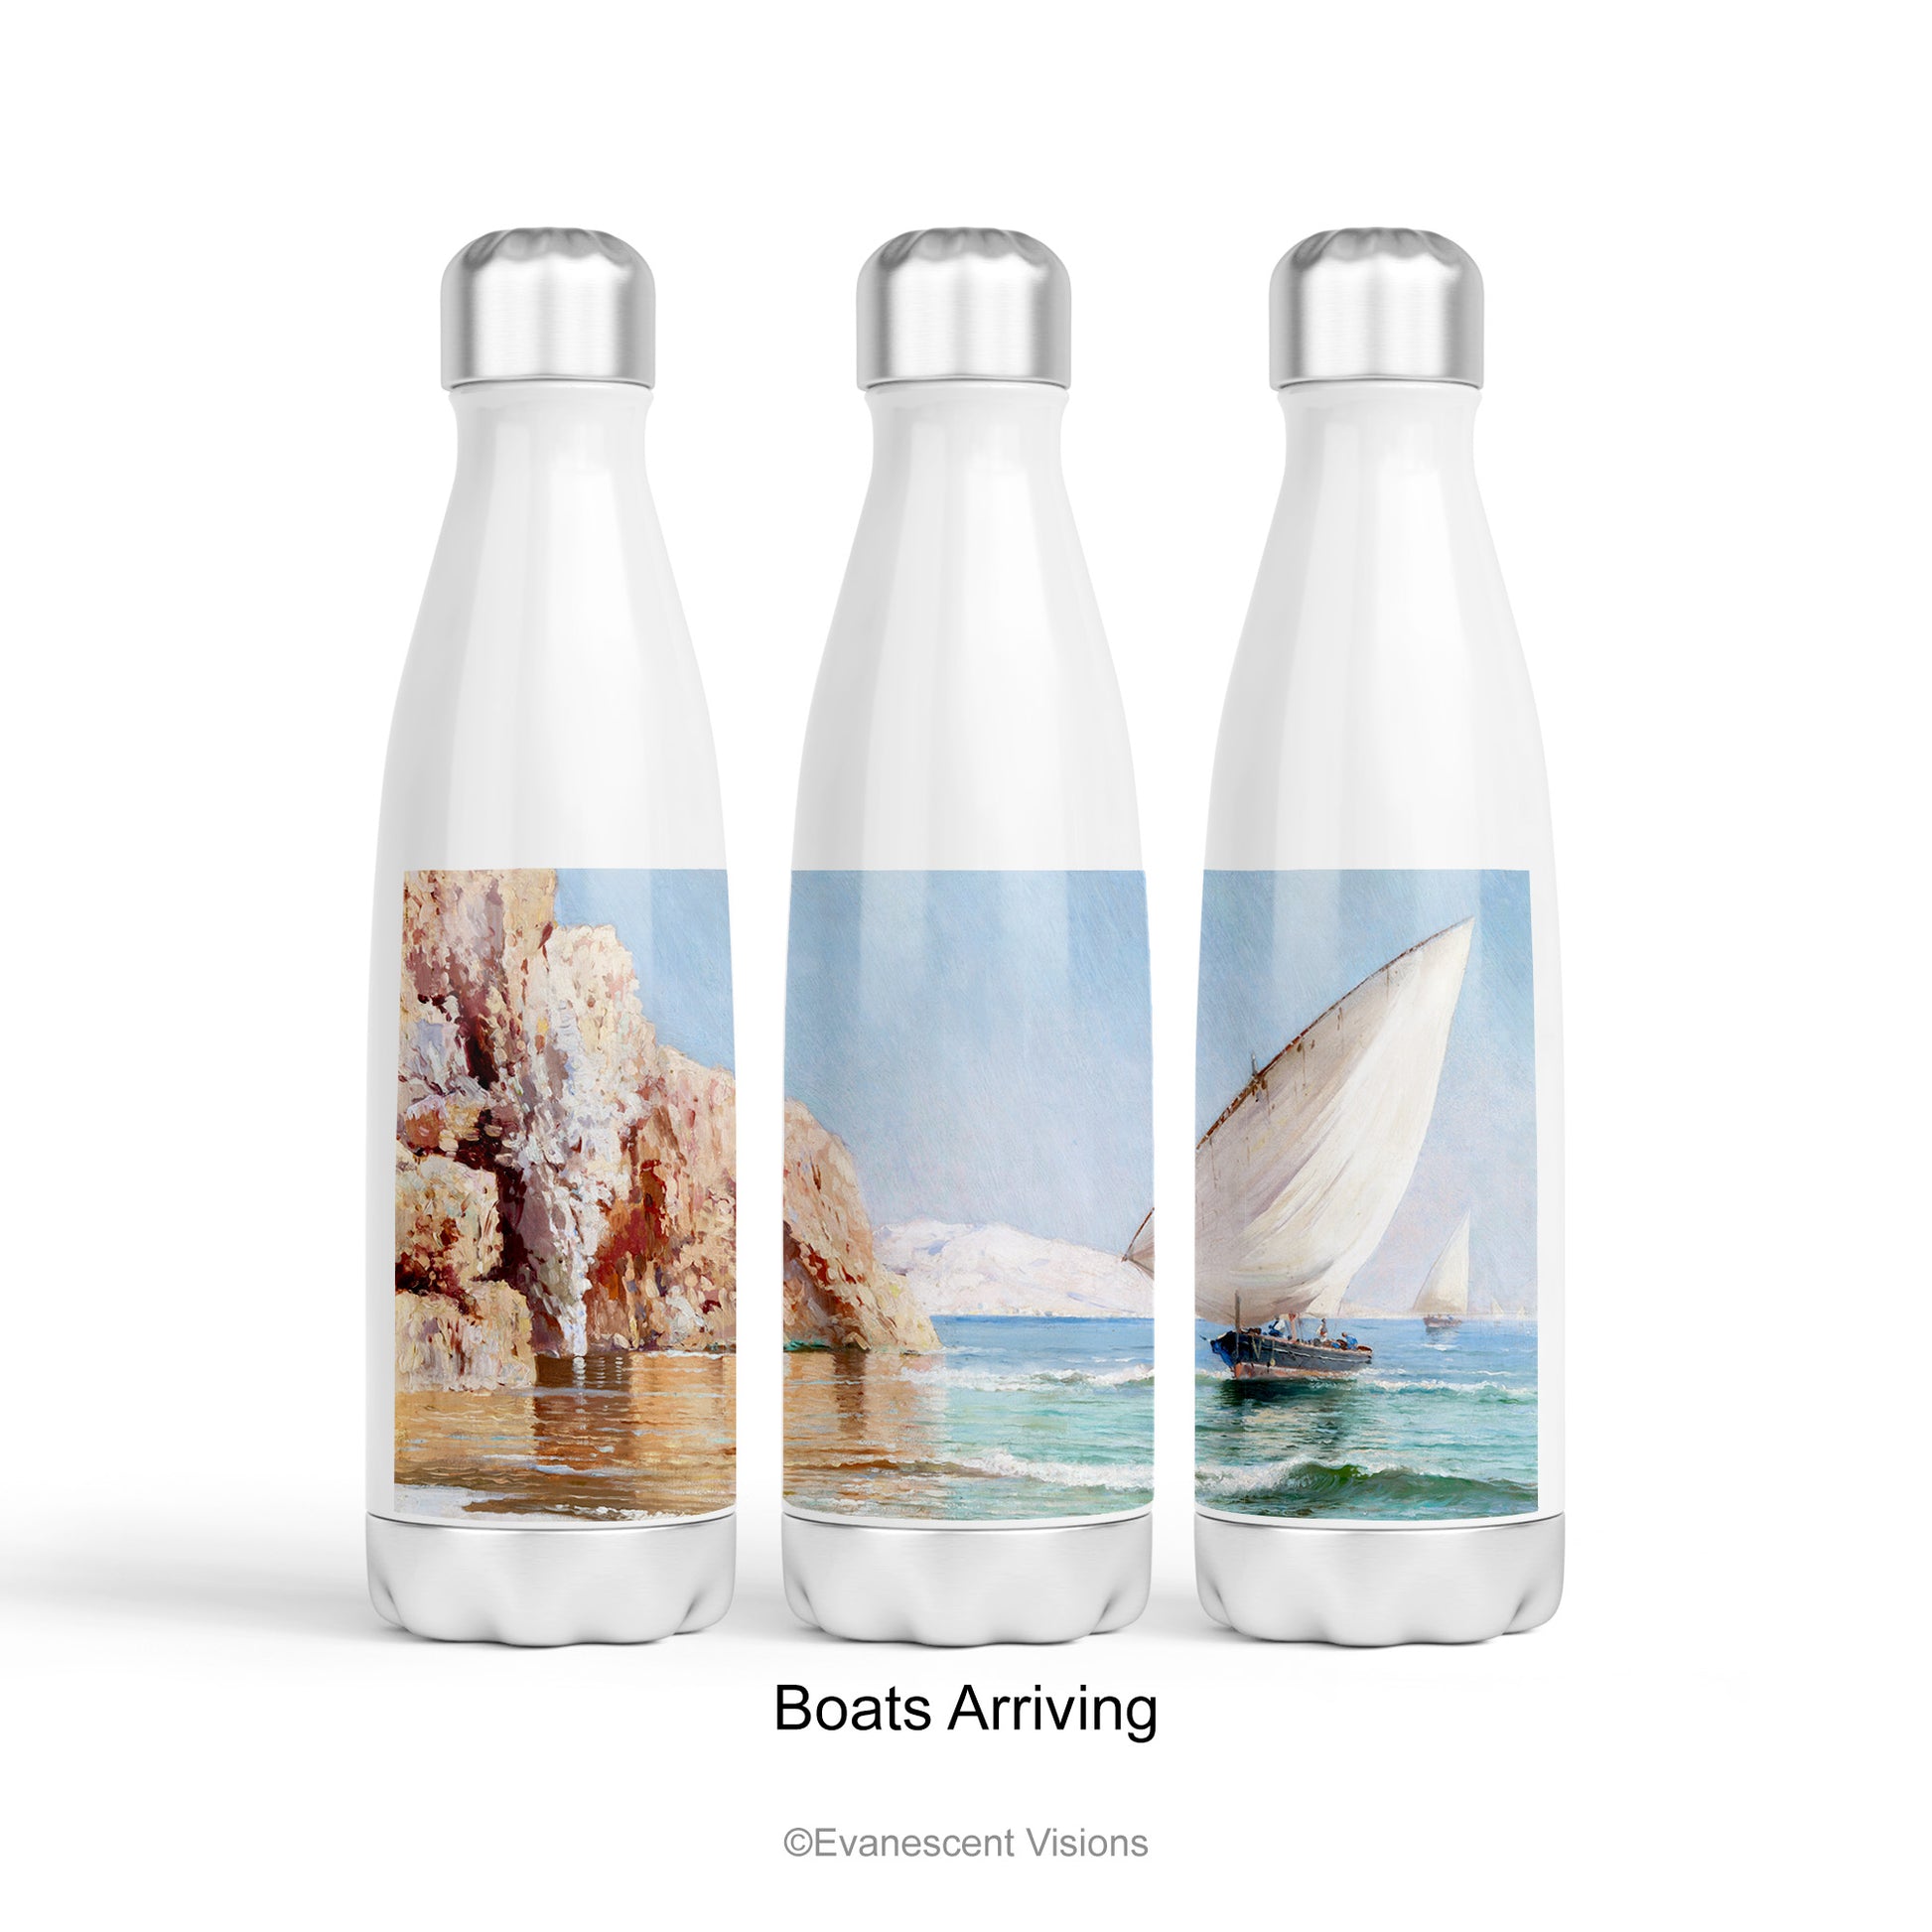 The 'Boats Arriving' design shown across three stainless steel bottles